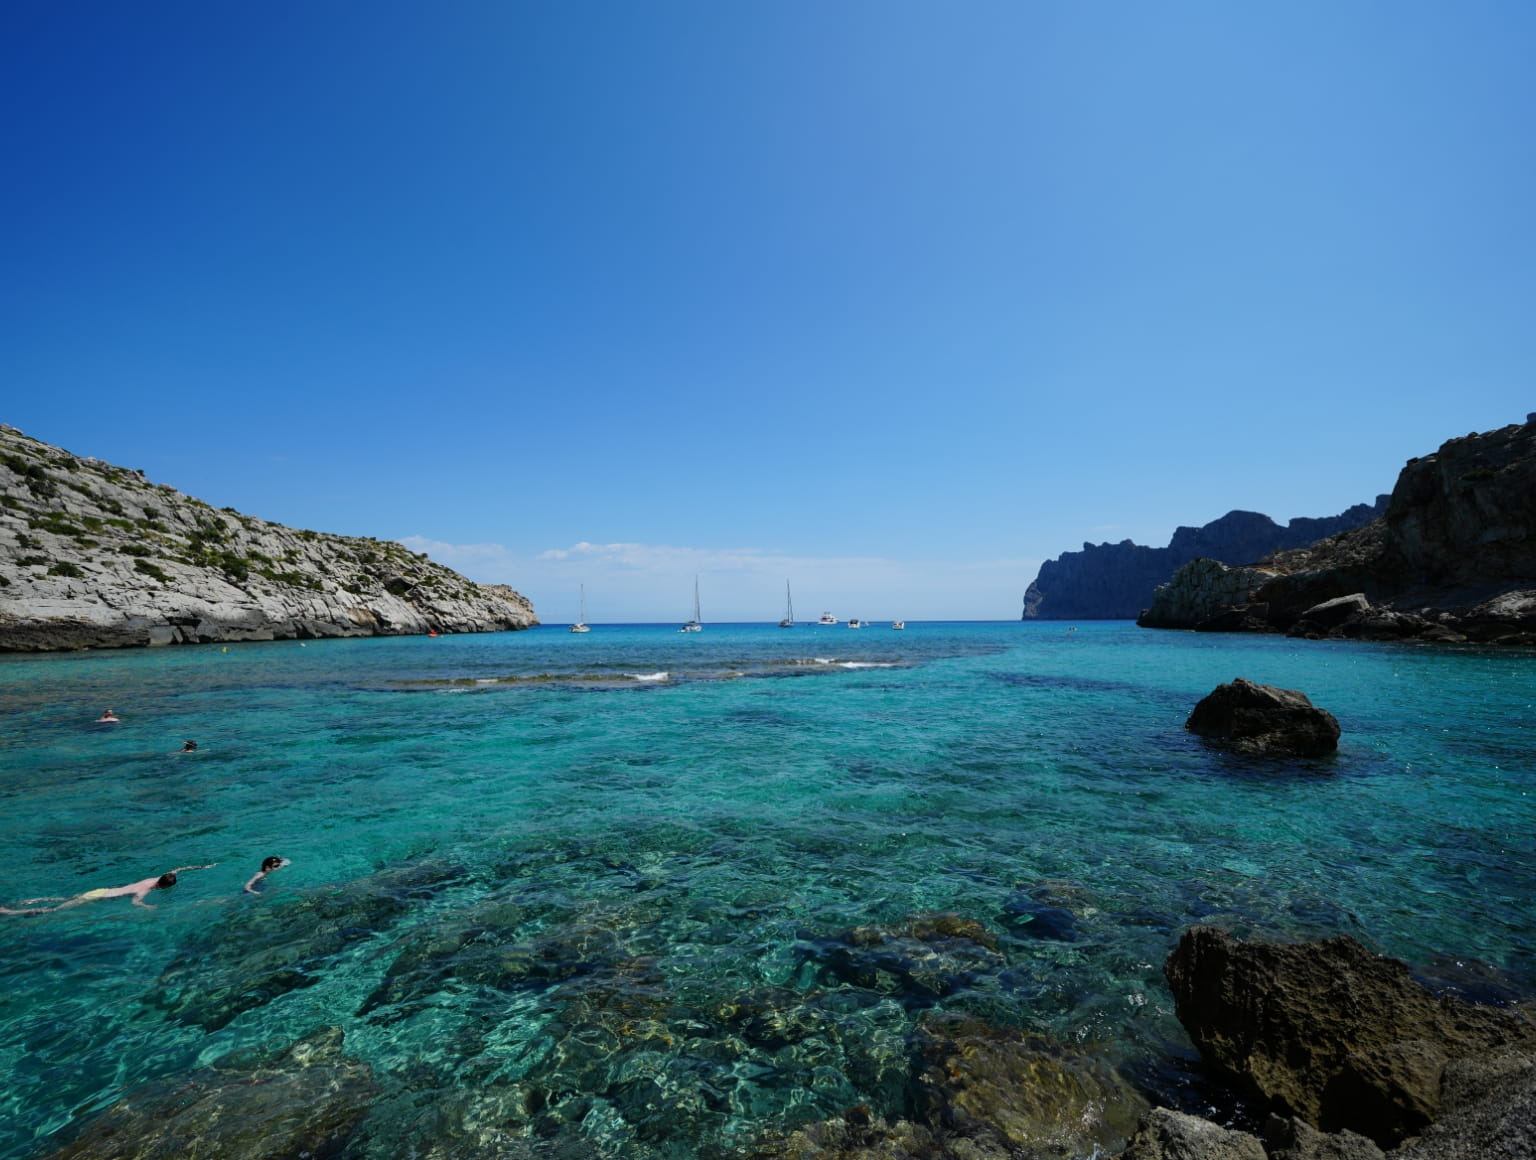 People swimming in the tuquoise blue waters of Cala San Vicente.